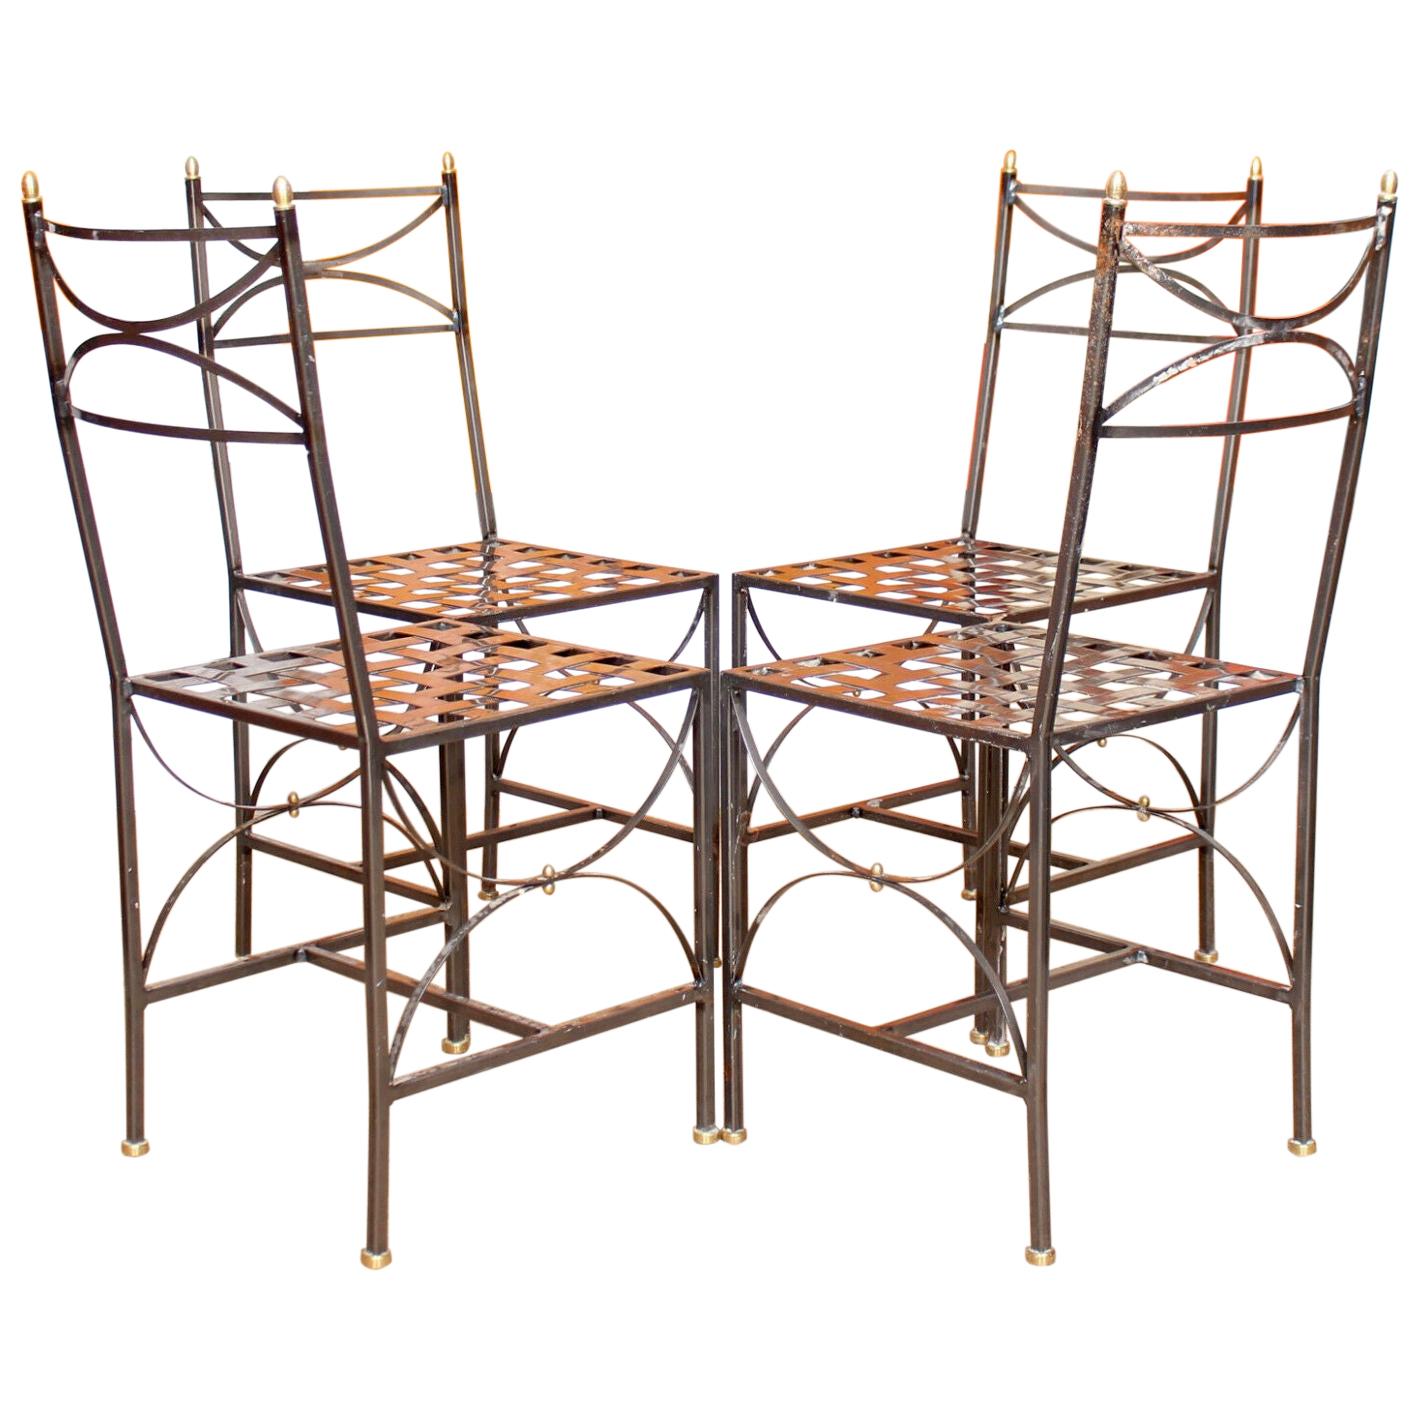 4 Orangery Dining Chairs Industrial Anodized Wrought Steel For Sale